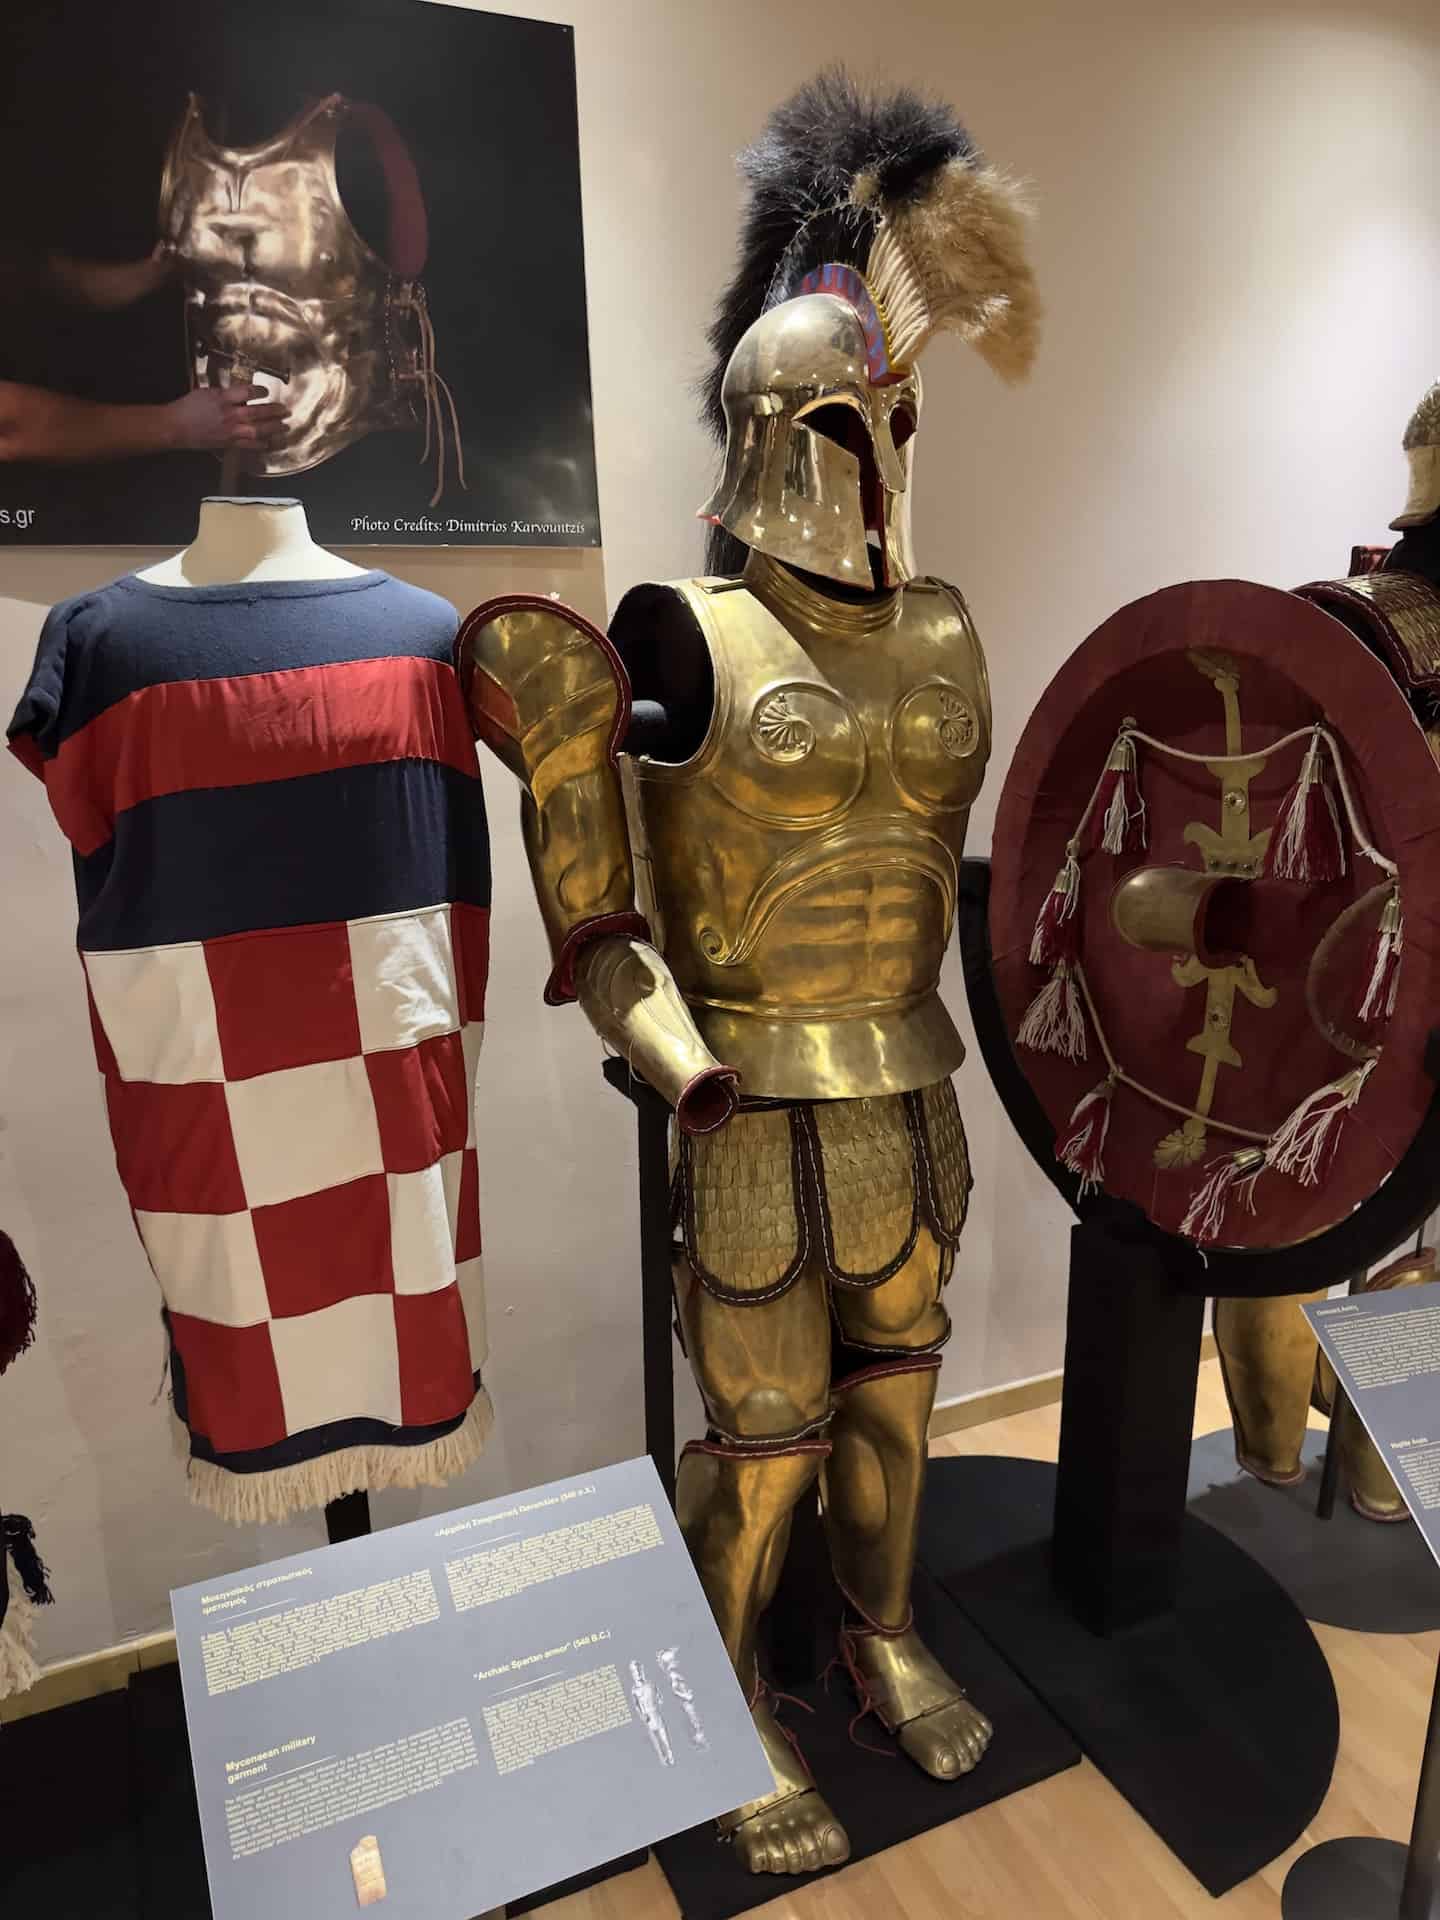 Archaic Spartan armor, 540 BC at the Museum of Ancient Greek Technology in Athens, Greece